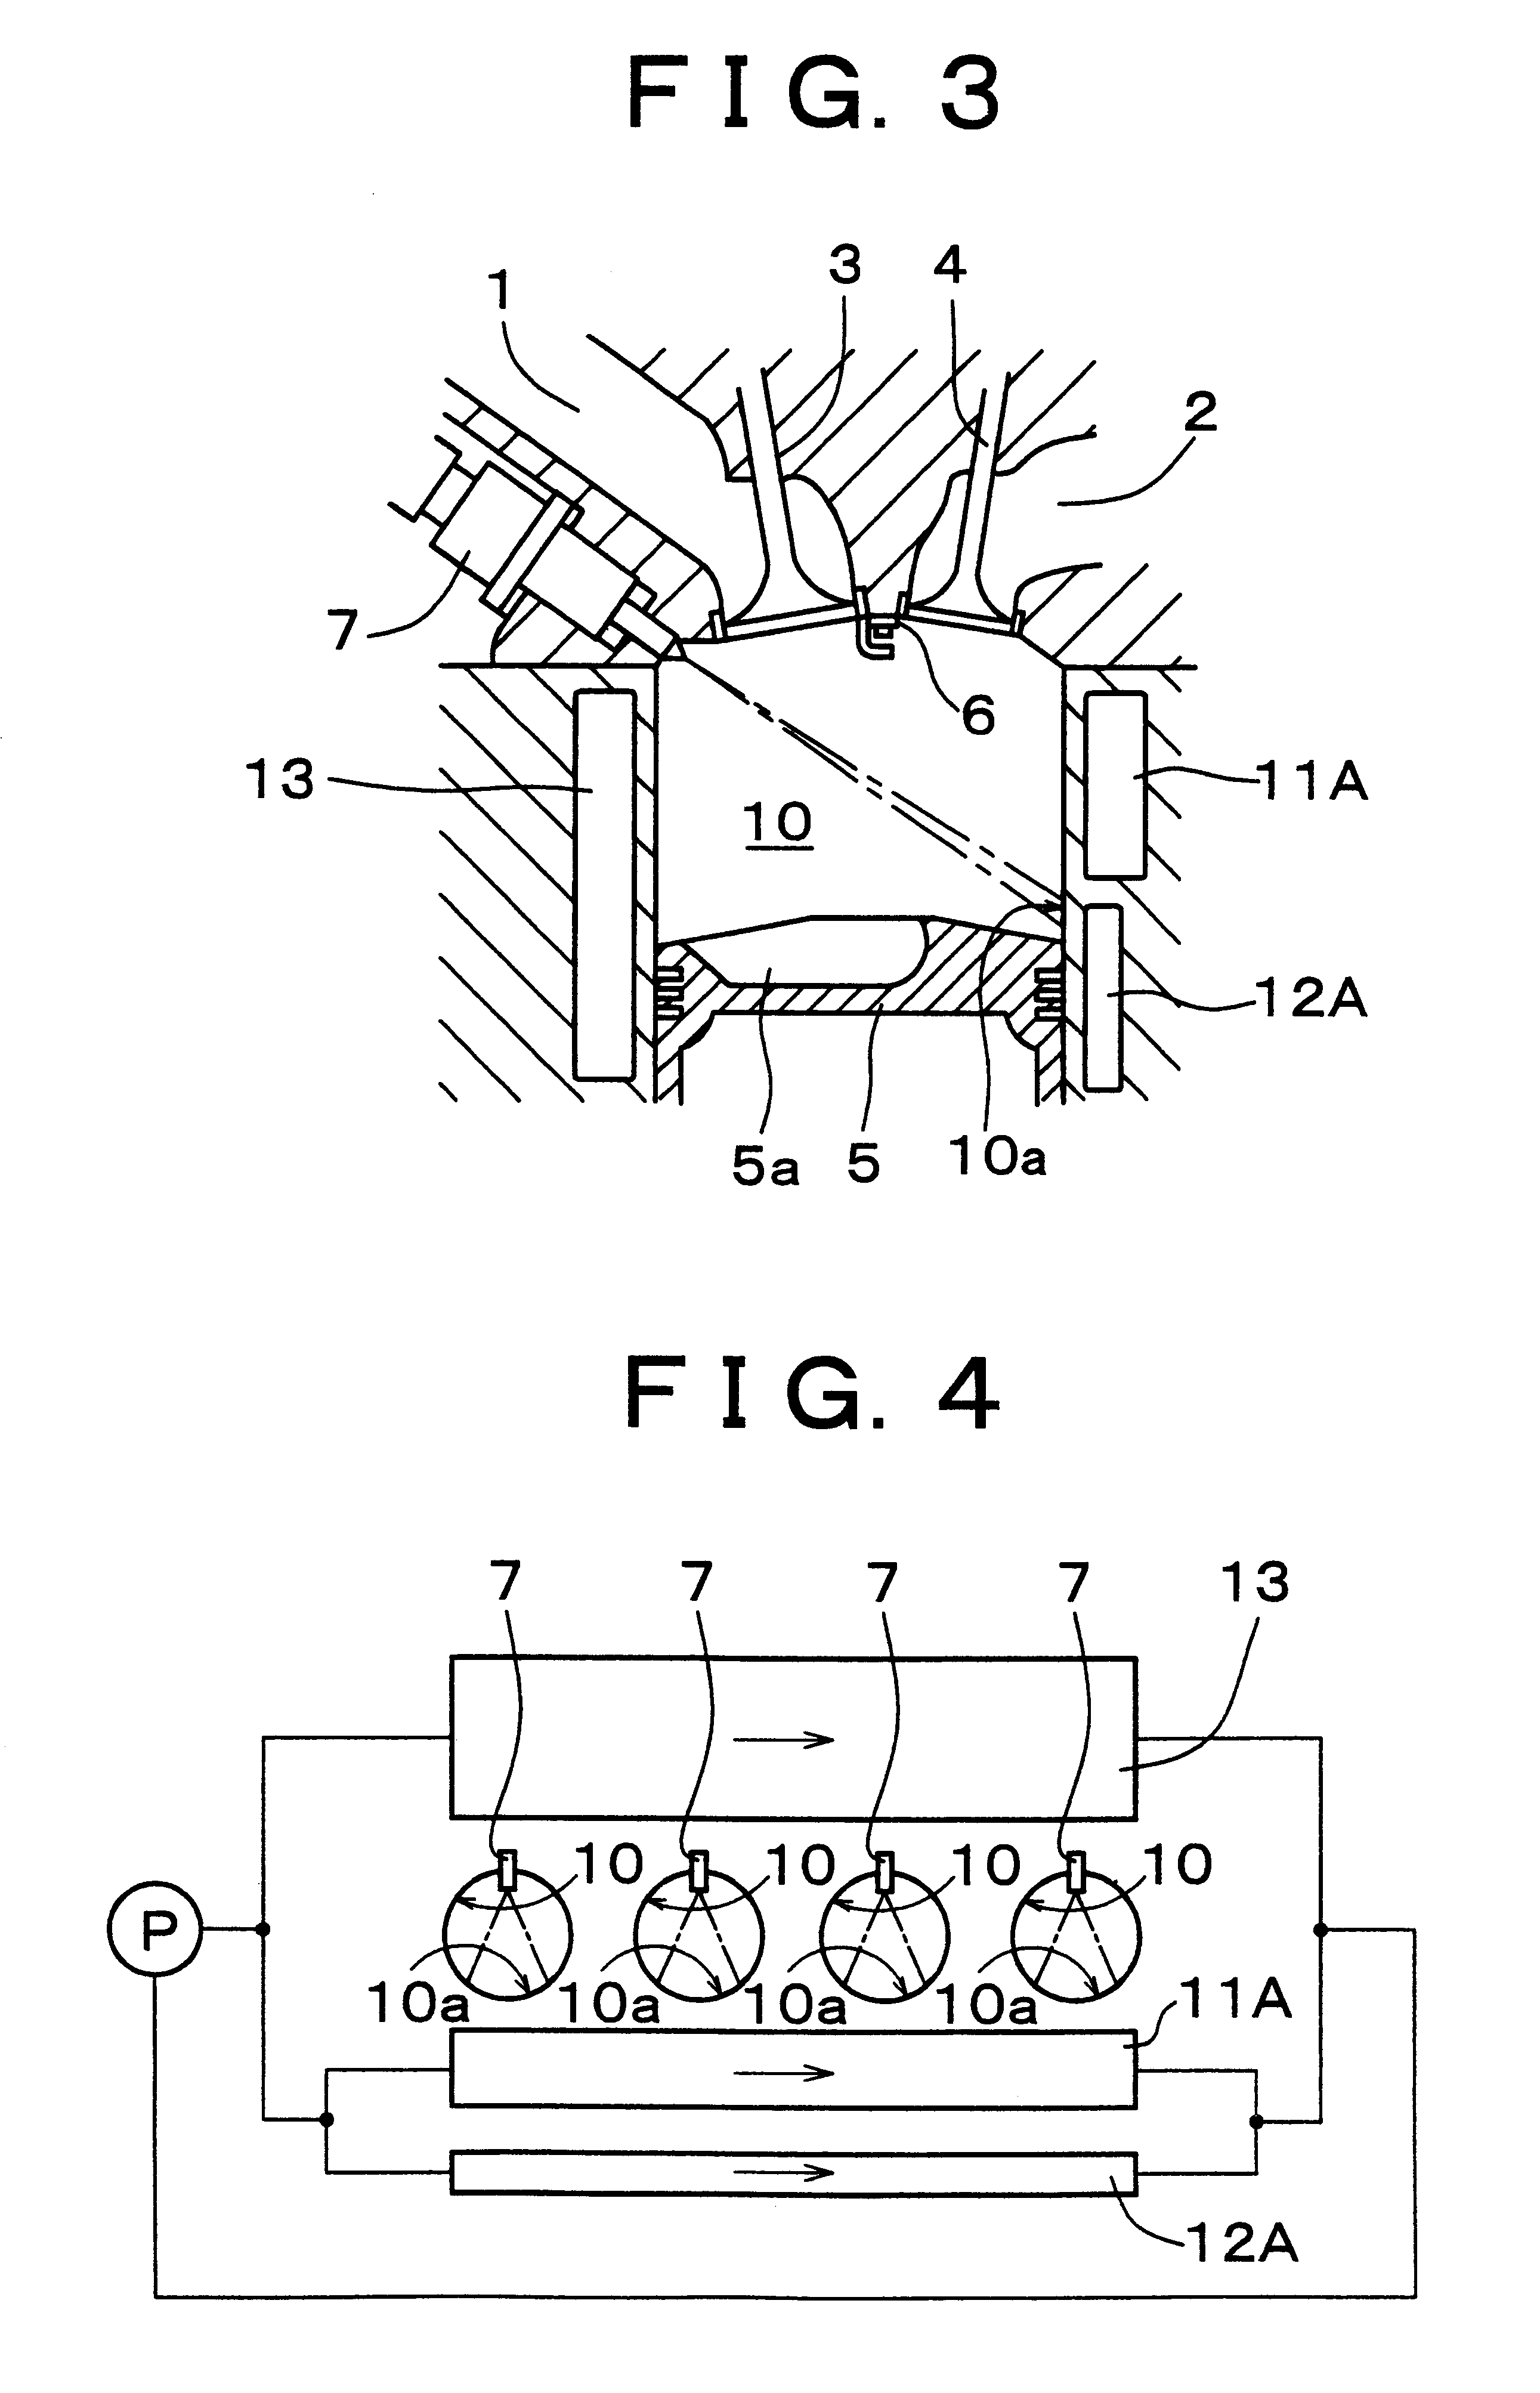 Direct-fuel-injection-type spark-ignition internal combustion engine and method of controlling the internal combustion engine